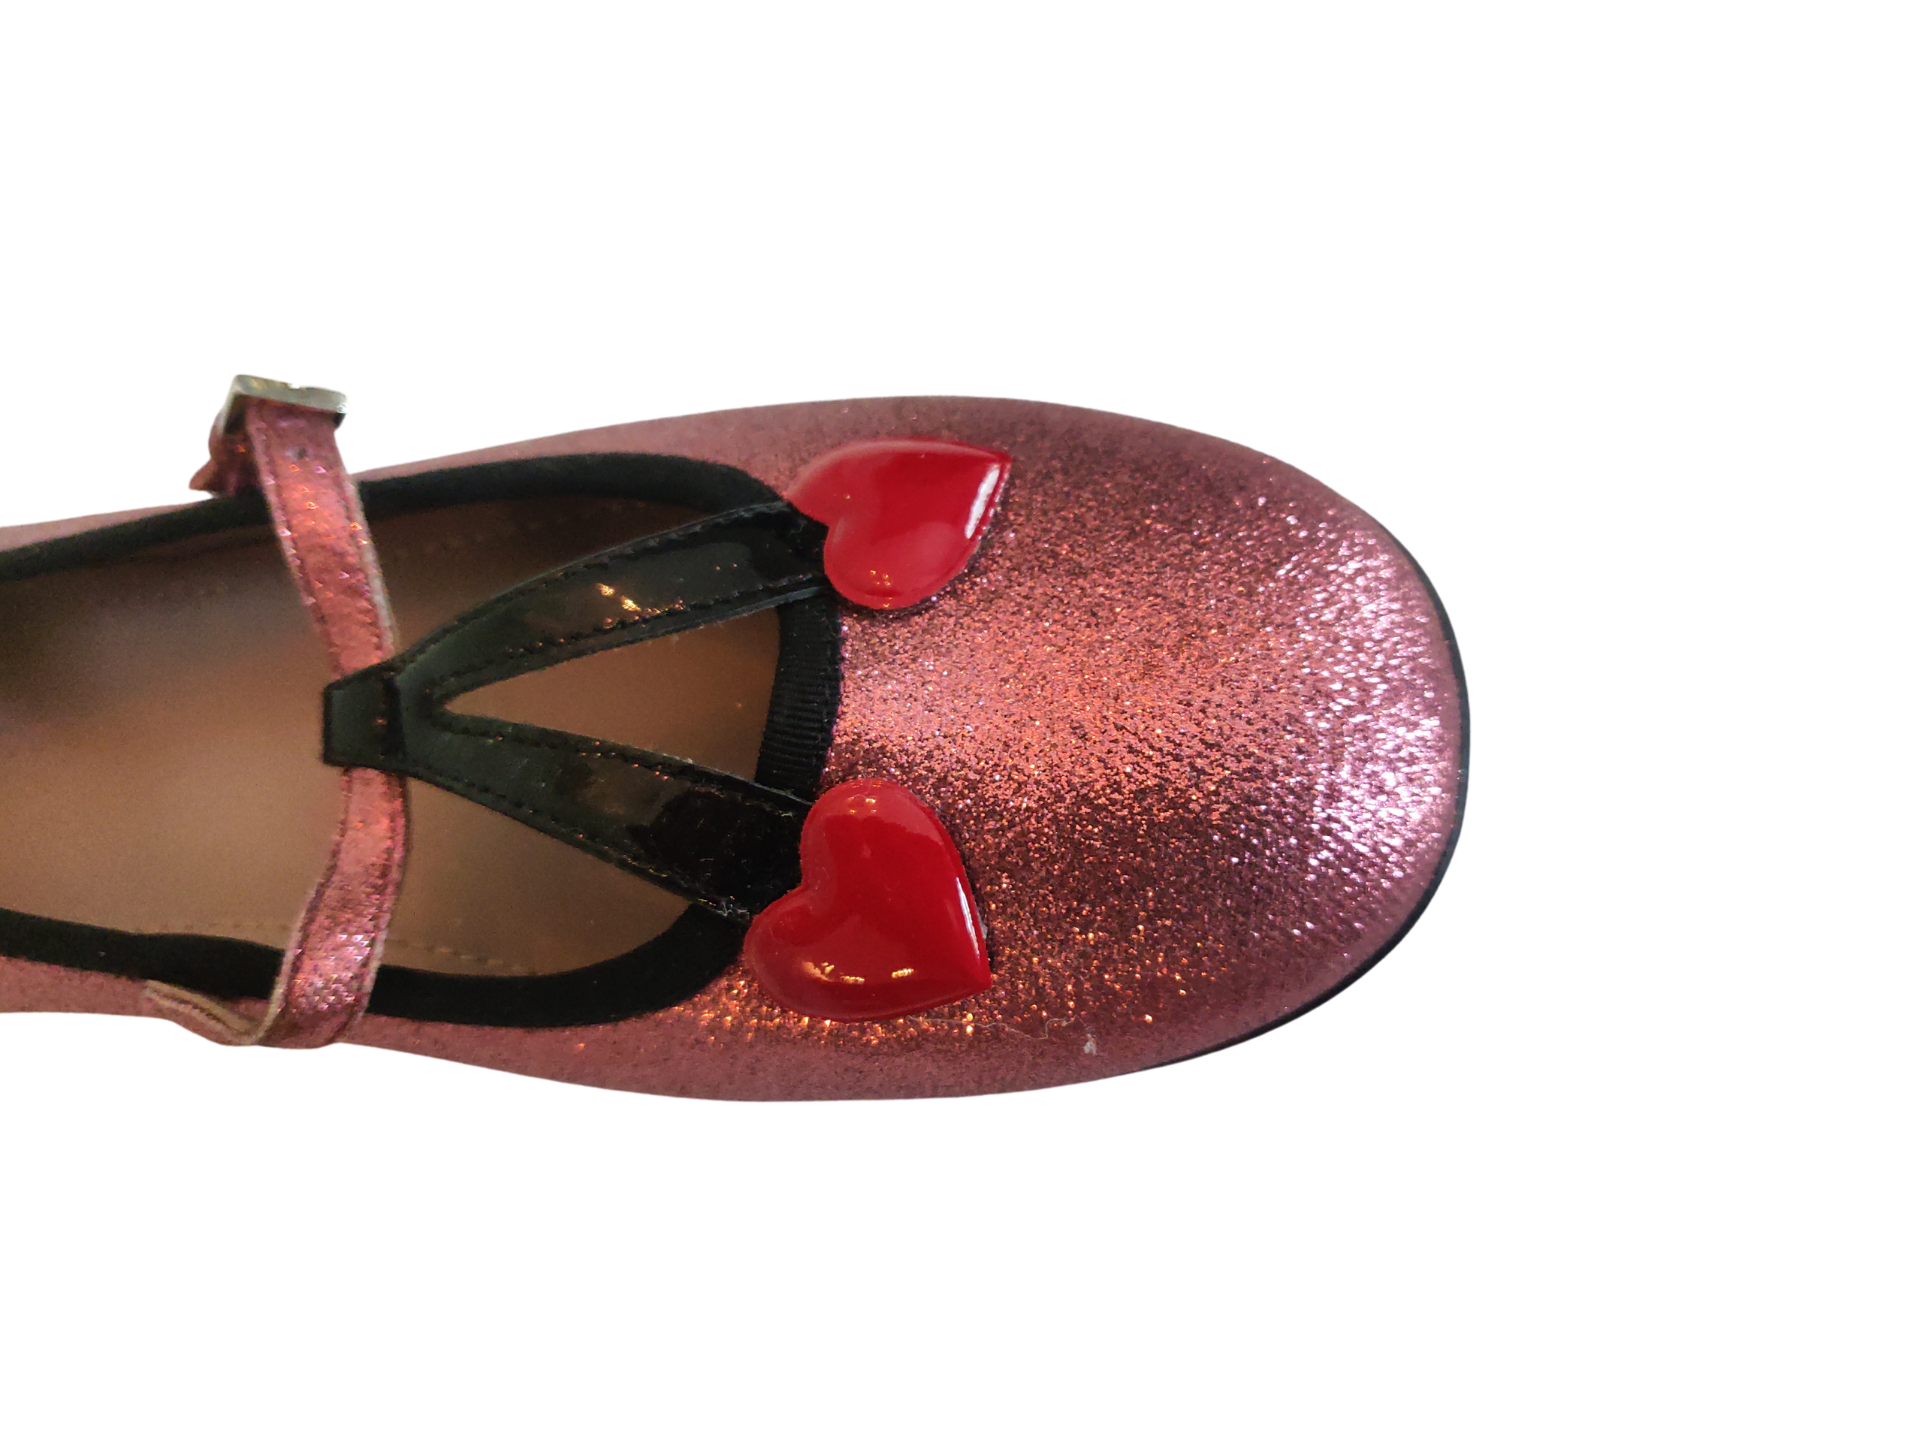 Gucci Pink Shimmer Fabric Ballet Flats With Hearts